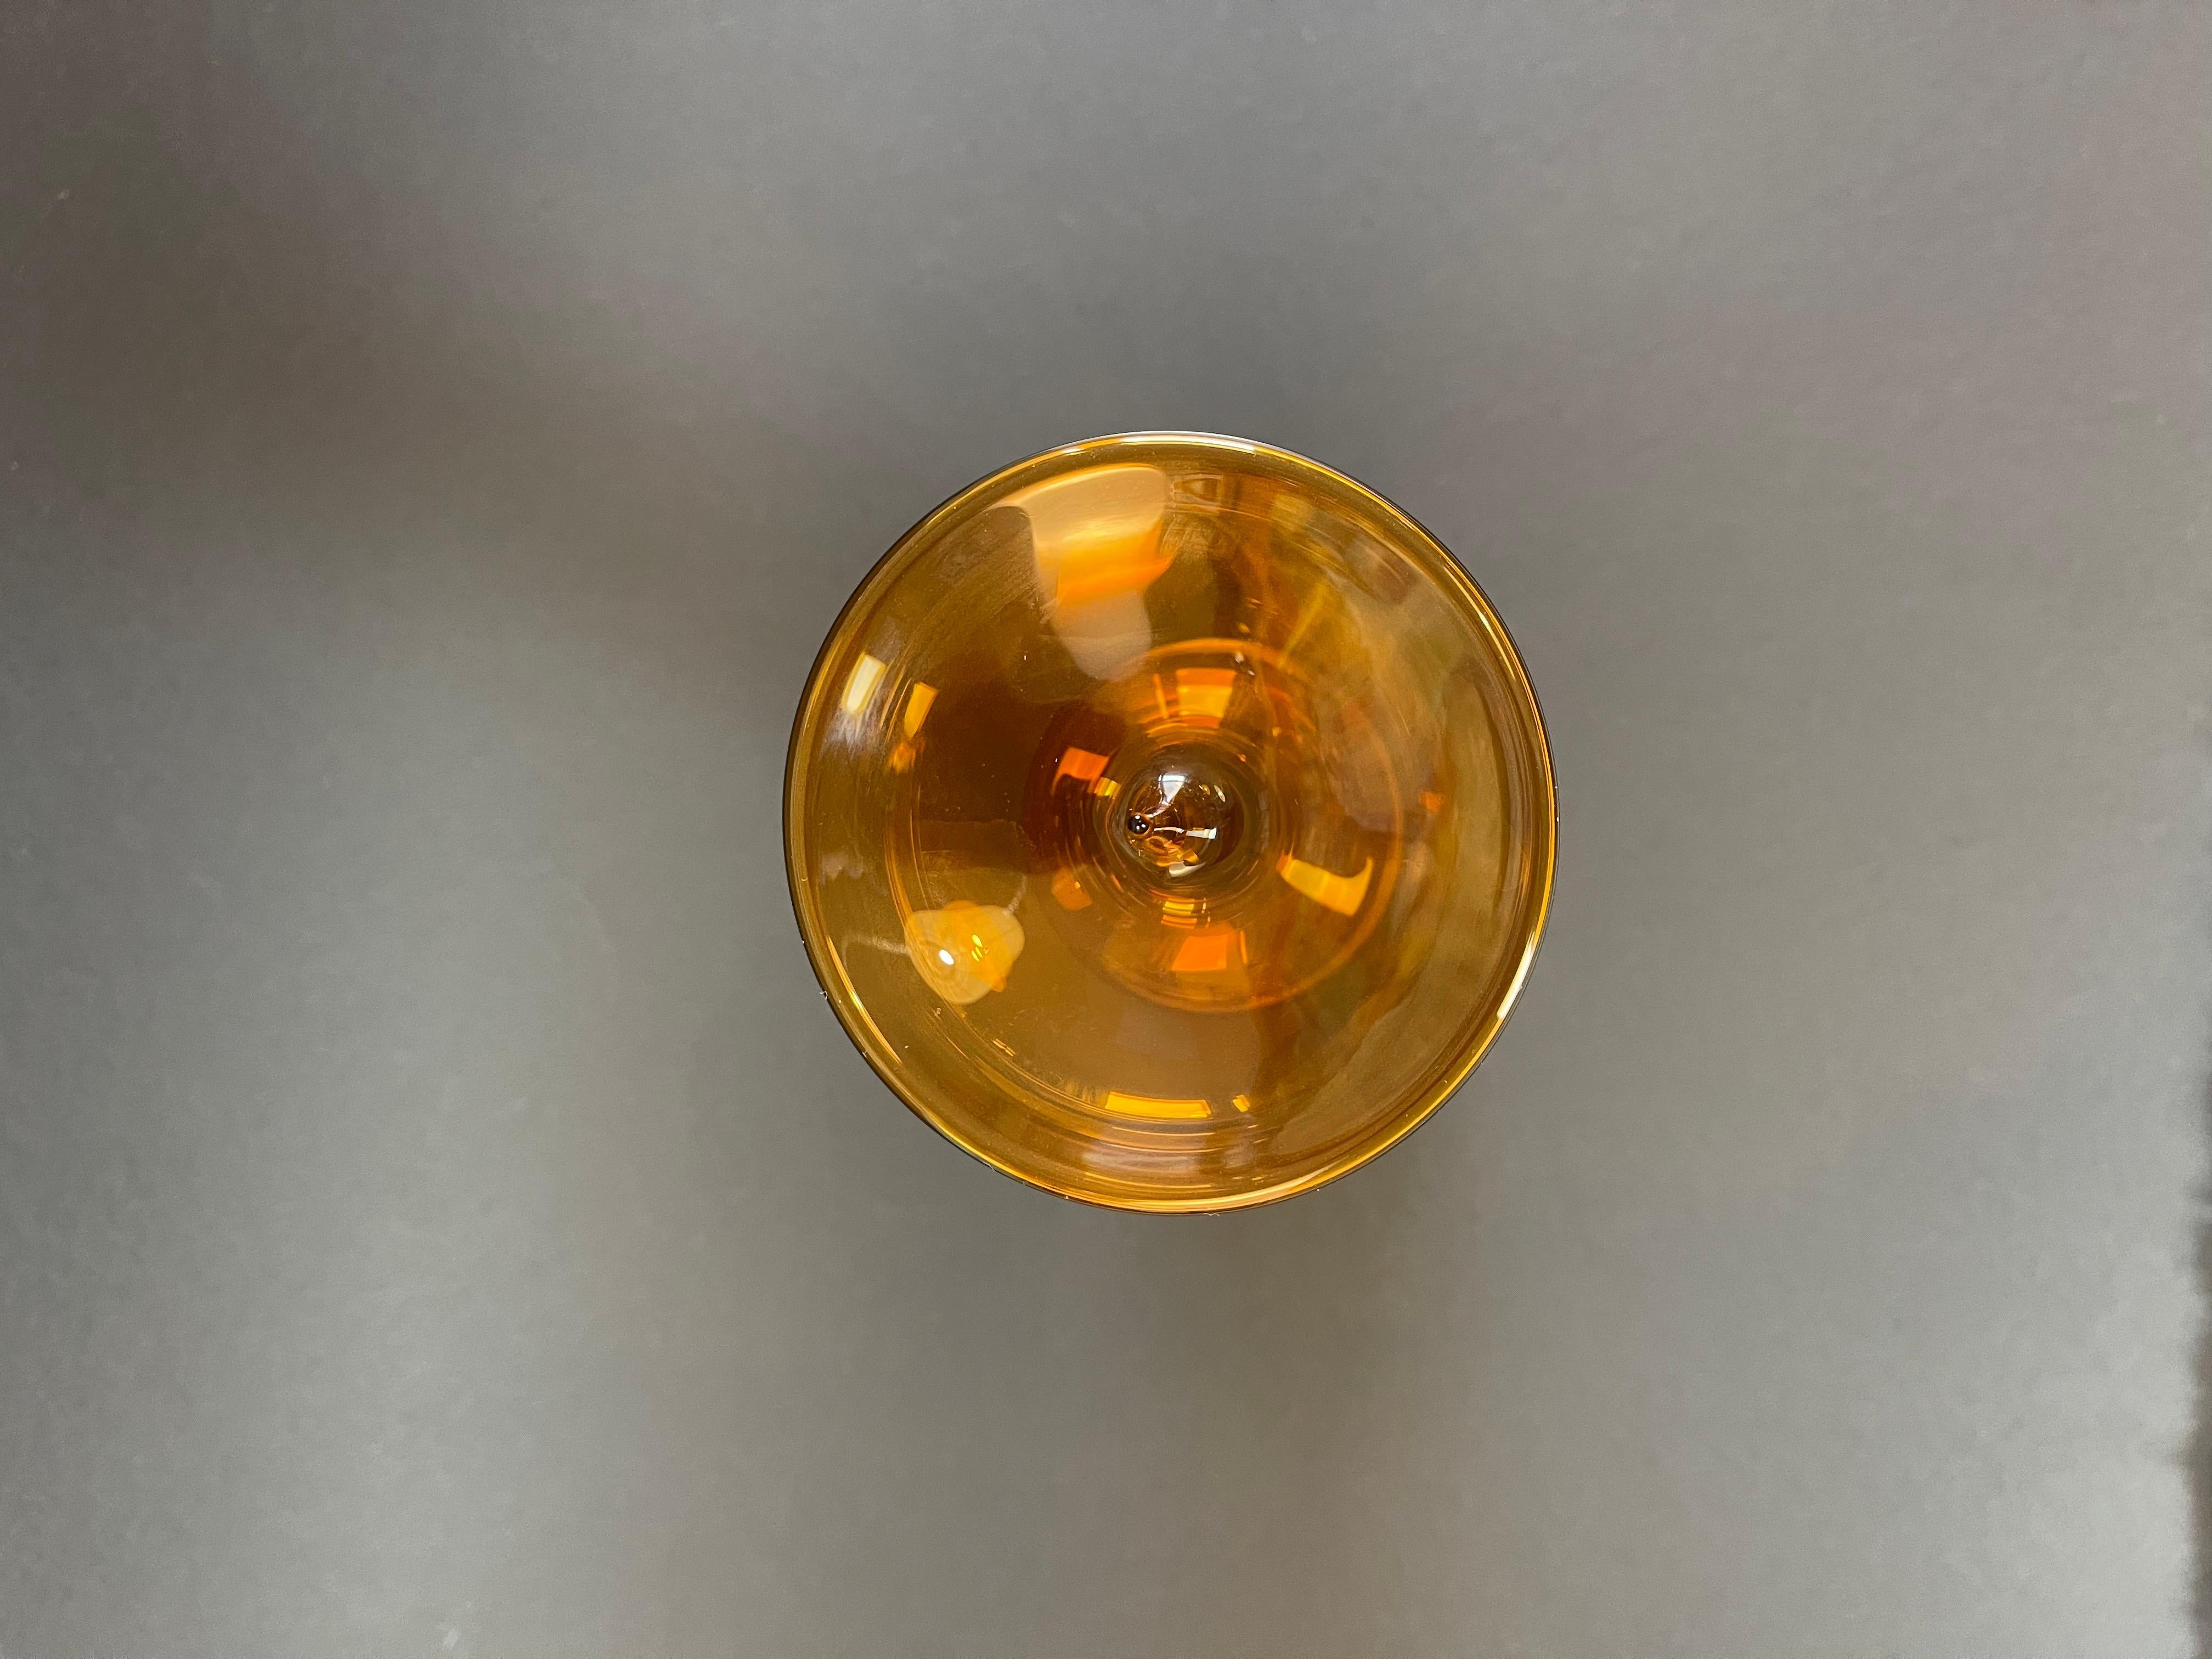 Mid-Century Modern Mid-Century Amber Art Glass Candlestick by Albin Schaedel 1960s, Eastern Germany